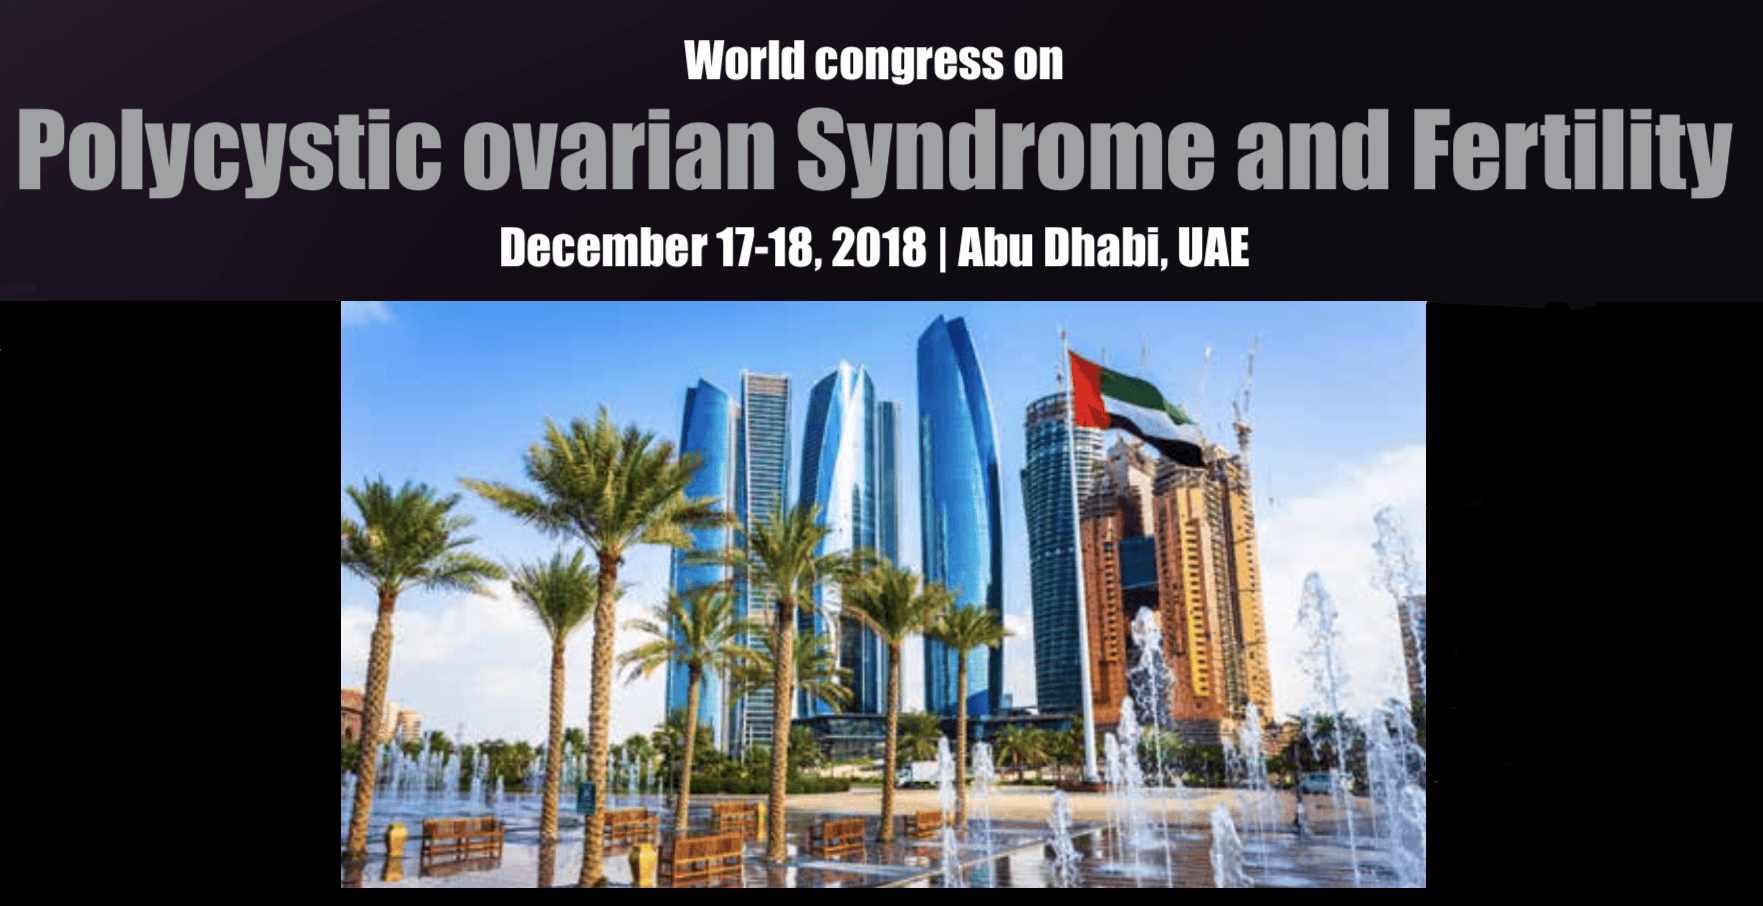 World Congress on Polycystic Ovarian Syndrome and Fertility - Coming Soon in UAE